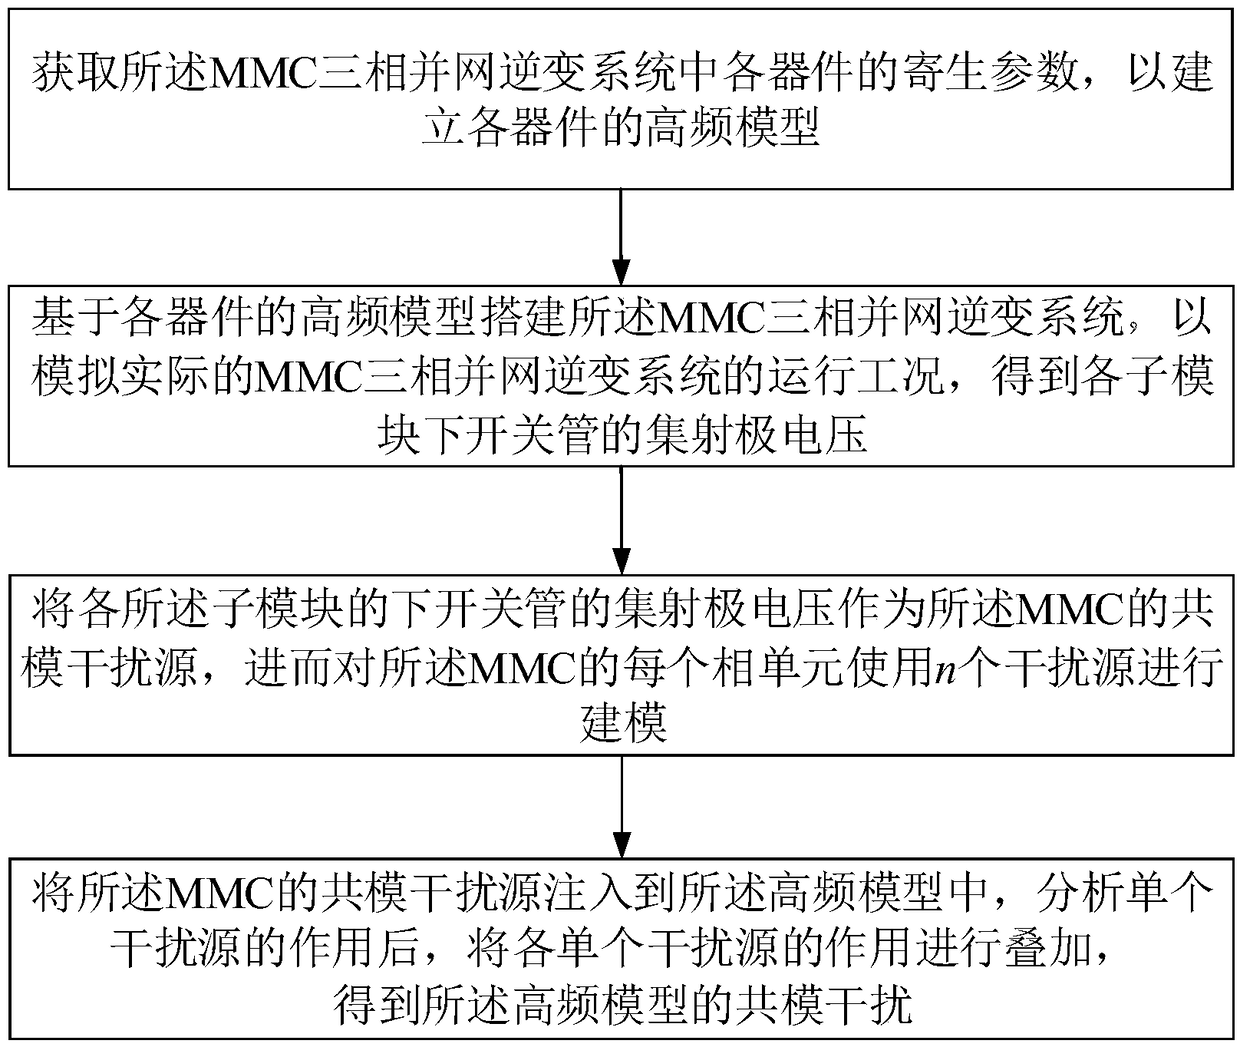 Common-mode conduction EMI (Electromagnetic Interference) modeling method and device for MMC (Modular Multilevel Converter) three-phase grid-connected inversion system